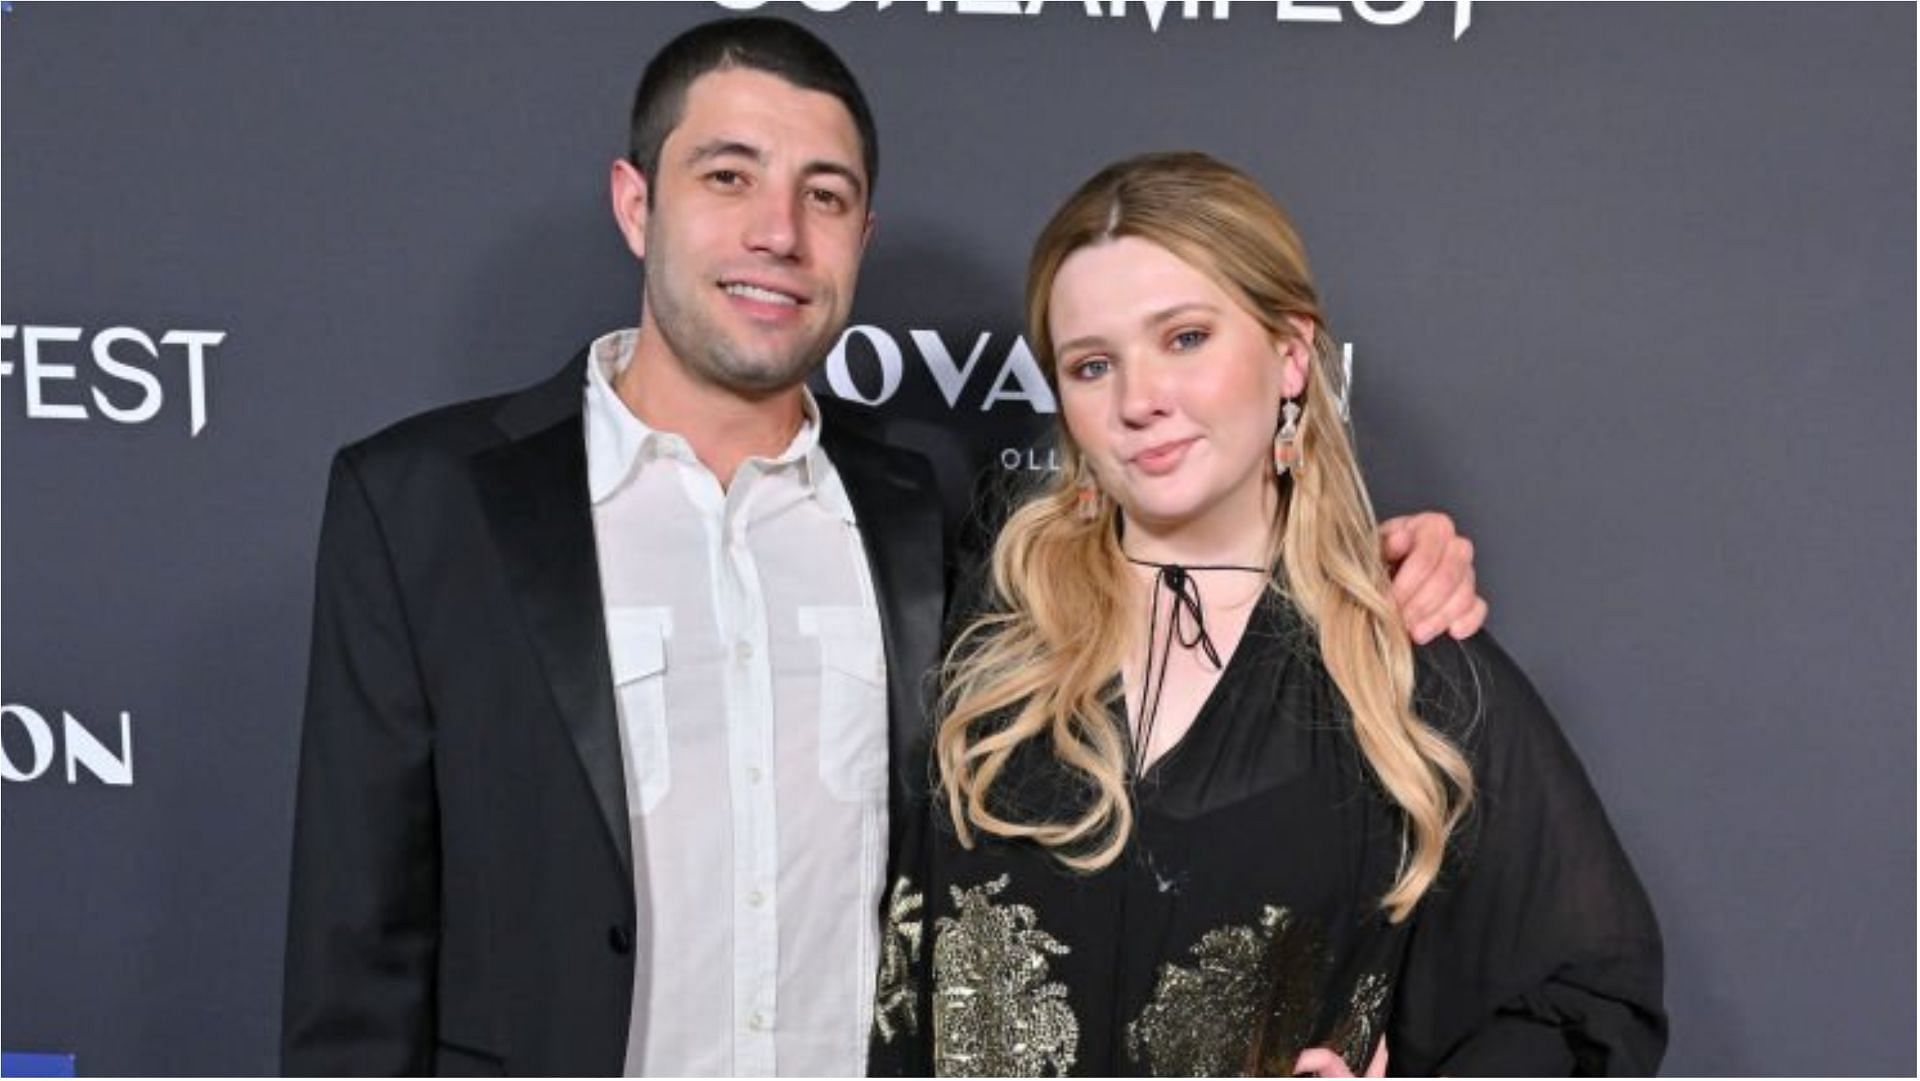 Abigail Breslin and Ira Kunyansky recently got married (Image via Axelle/Bauer-Griffin/Getty Images)